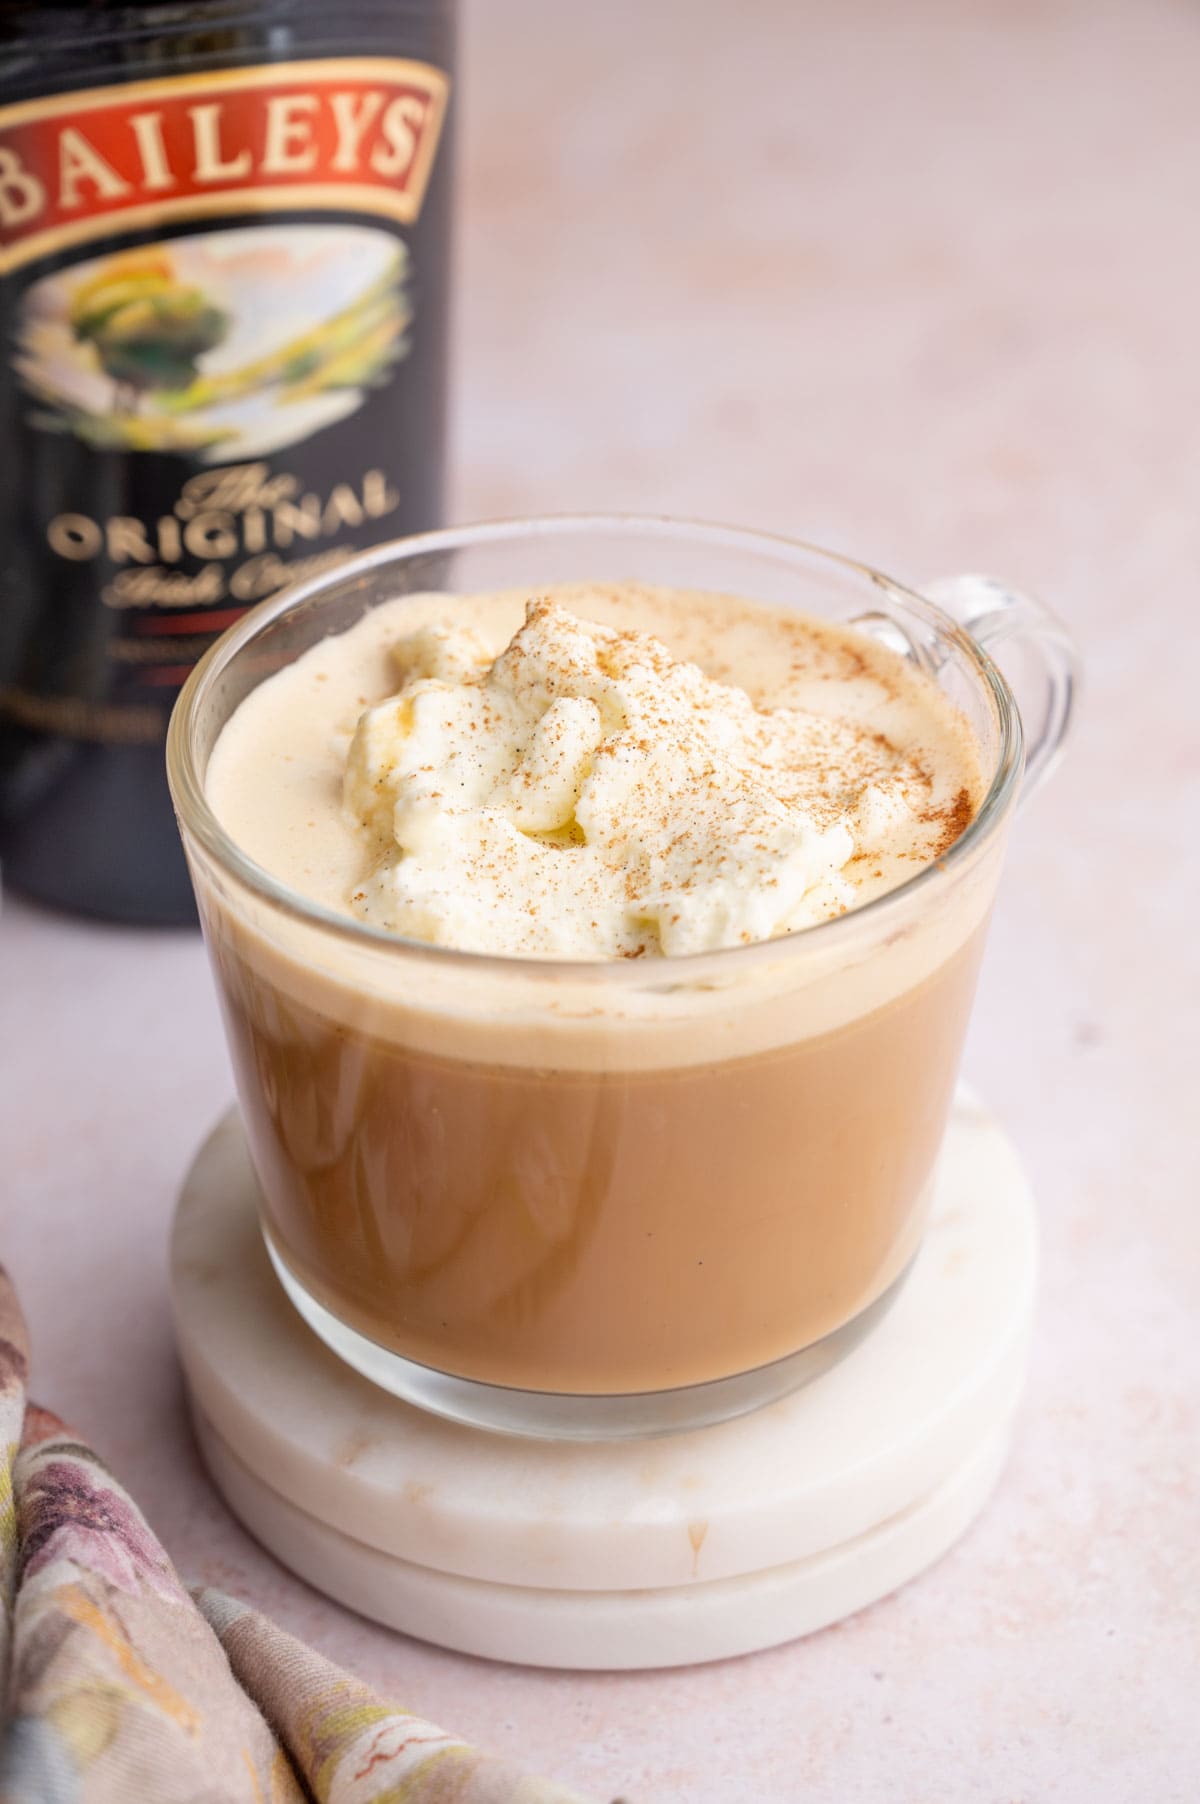 https://www.everyday-delicious.com/wp-content/uploads/2023/03/baileys-coffee-everyday-delicious-1.jpg